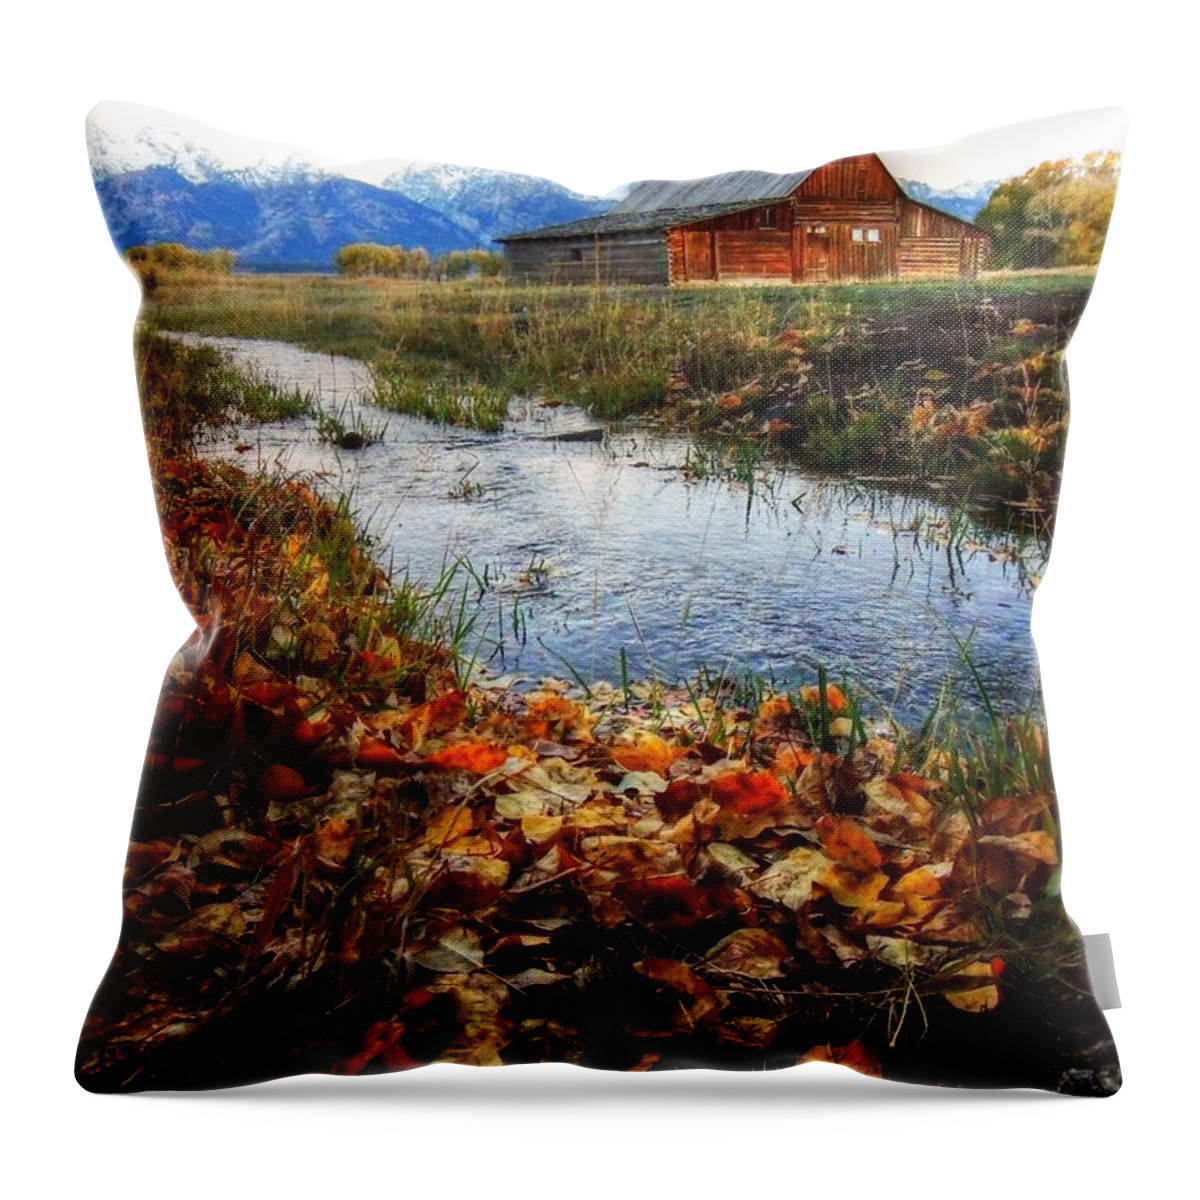 Mormon Row Throw Pillow featuring the photograph Mormon Row by Charlotte Schafer